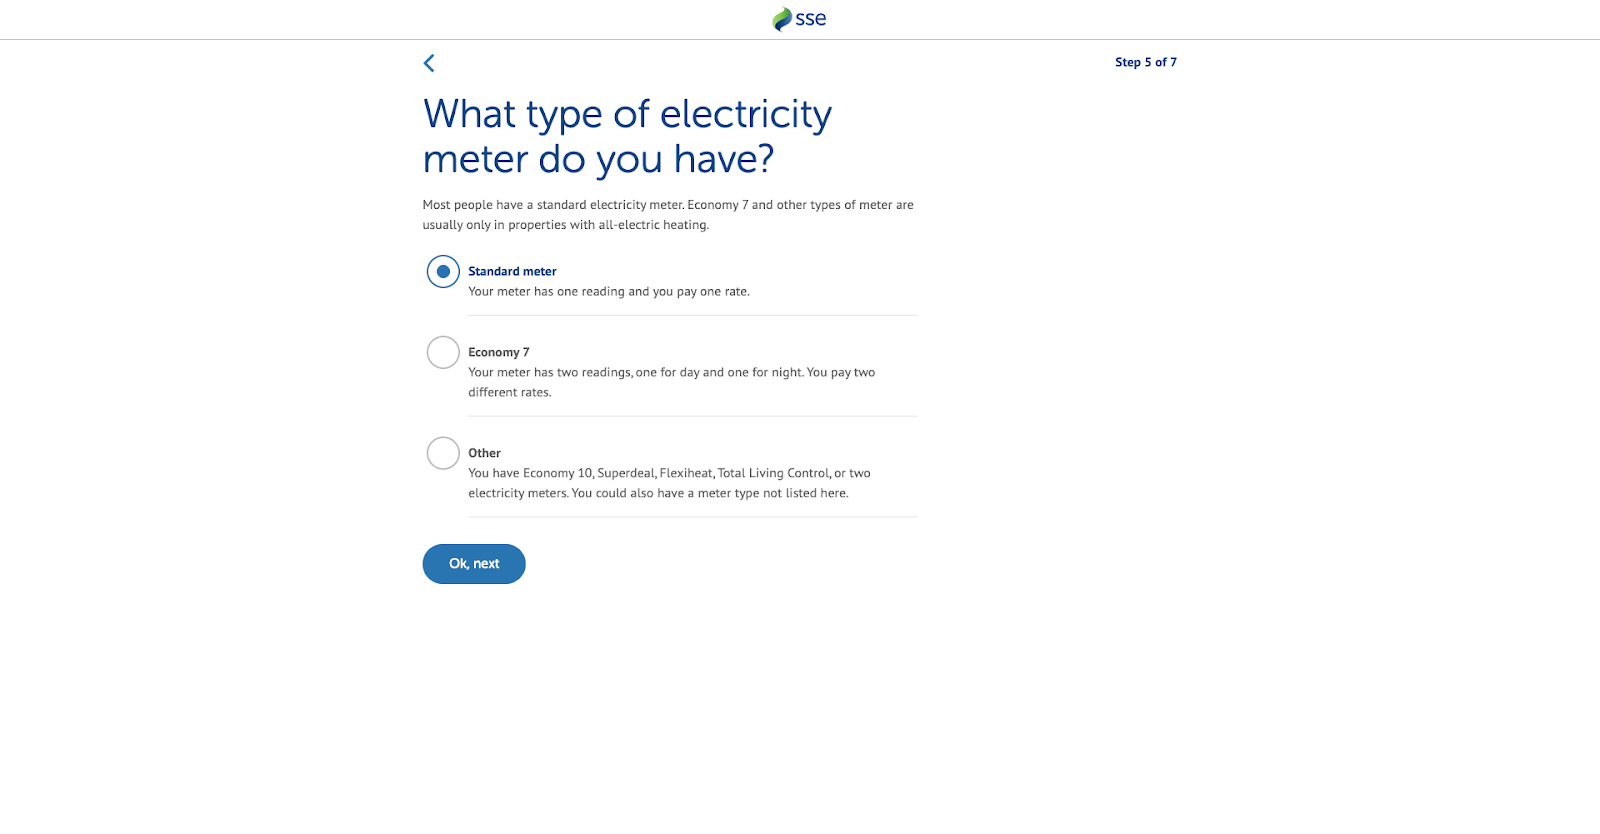 SSE energy quote journey question regarding what electricity meter a customer has.